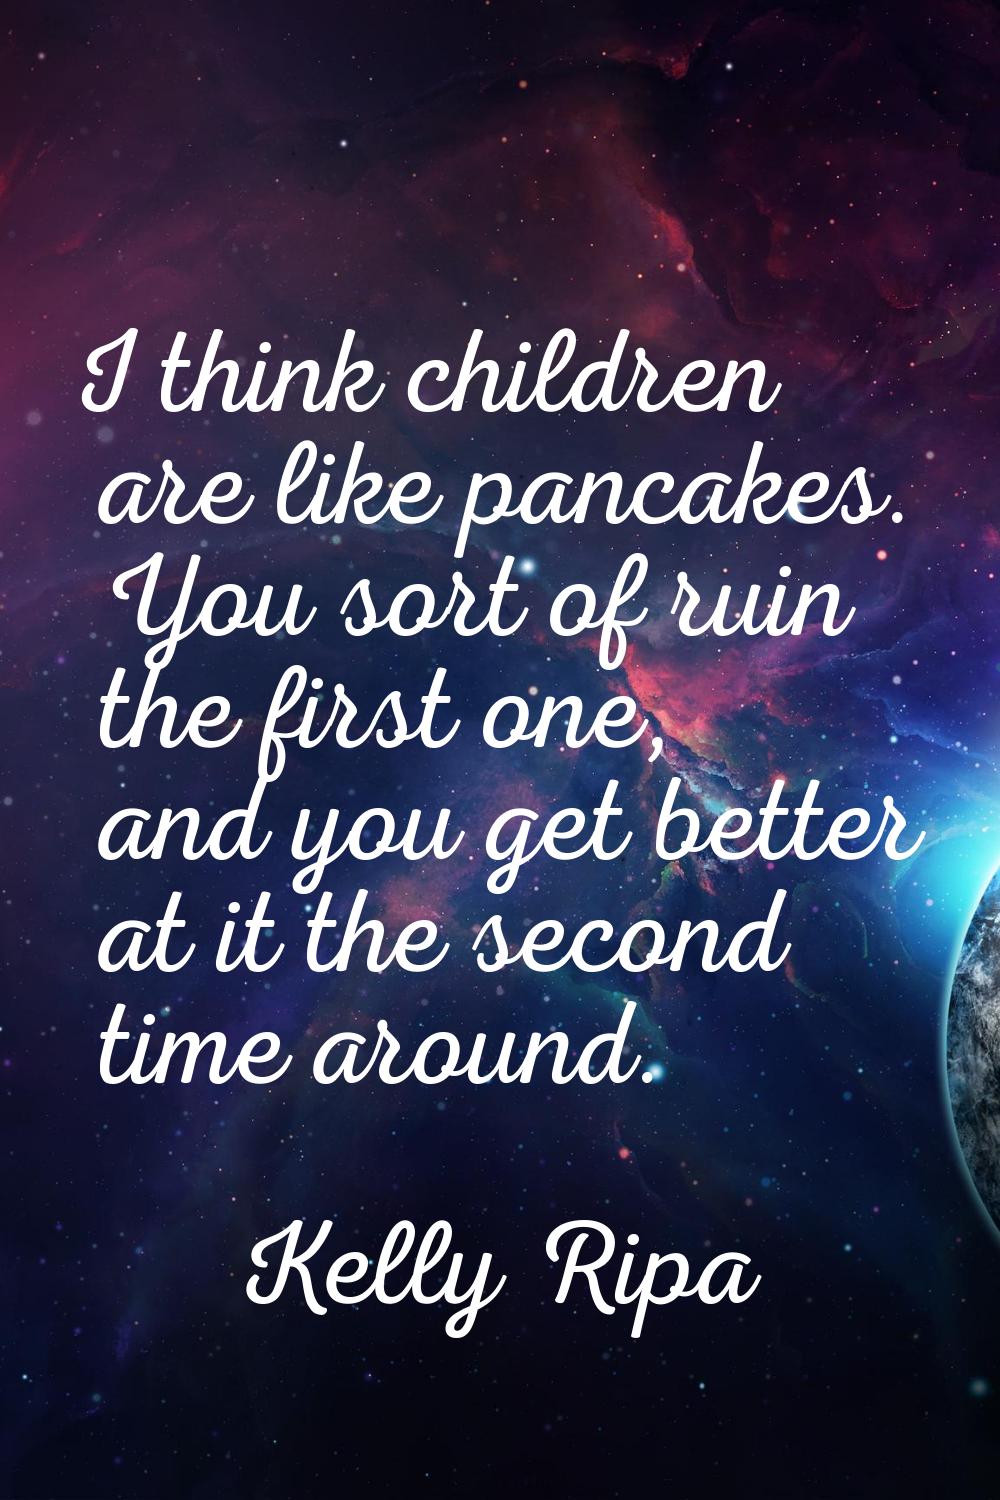 I think children are like pancakes. You sort of ruin the first one, and you get better at it the se